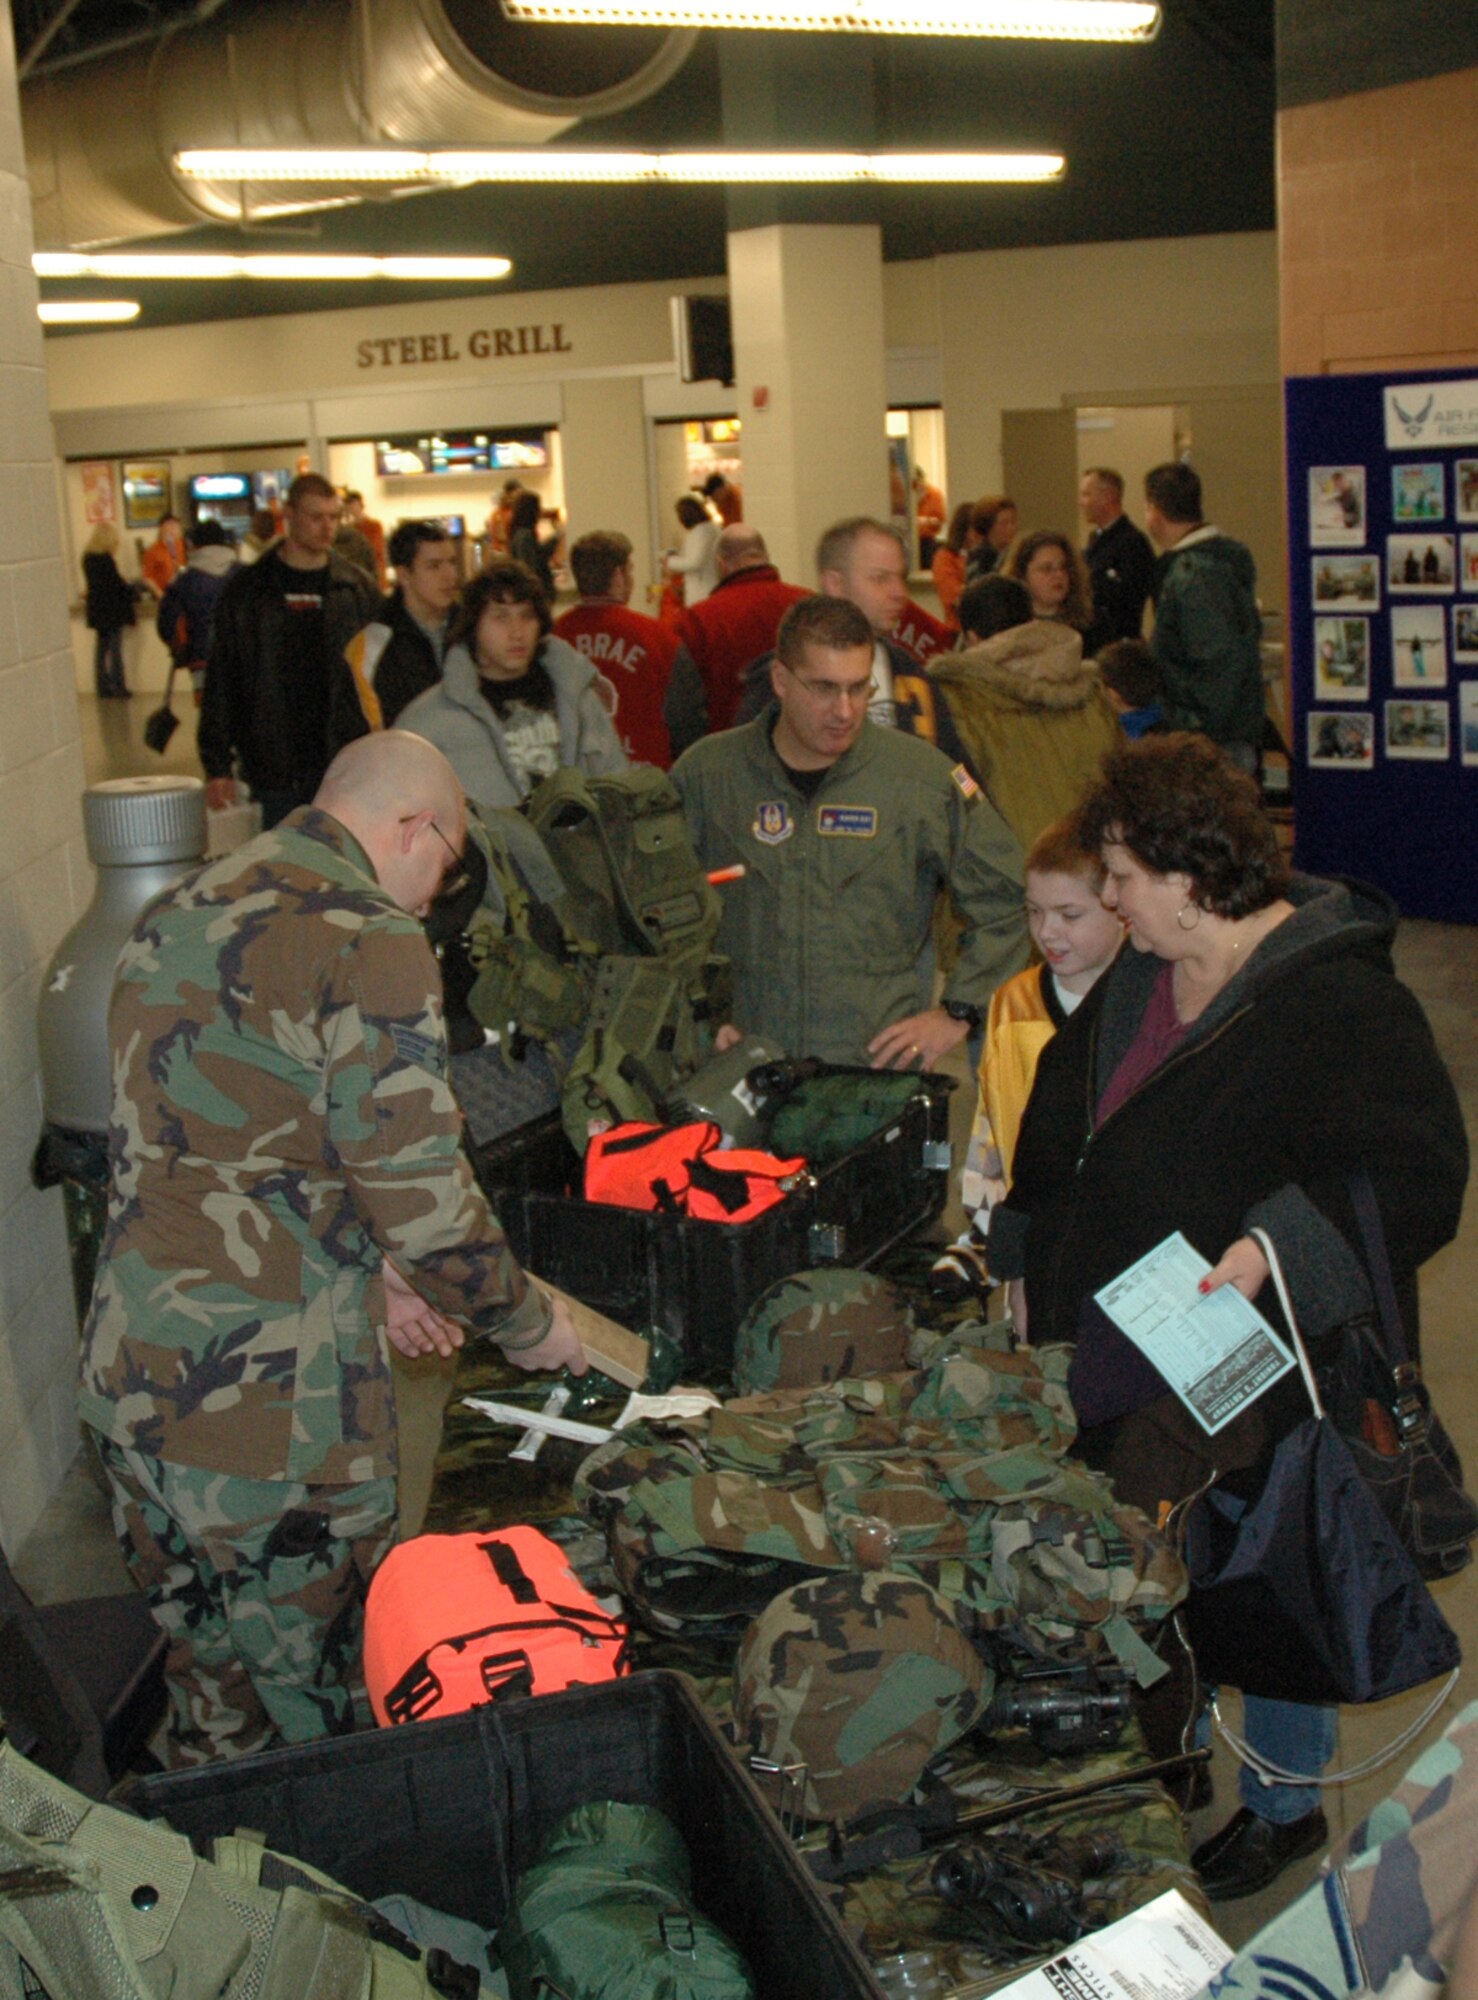 YOUNGSTOWN, Ohio – Hockey fans check out a military display provided by the Air Force Reserve's 910th Security Forces Squadron at the Chevrolet Centre in downtown Youngstown Jan. 19, 2008.  The display was provided as part of Military Night during the Youngstown Steelhounds hockey game versus the Shreveport Mudbugs. U.S. Air Force photo/Tech. Sgt. Bob Barko Jr.